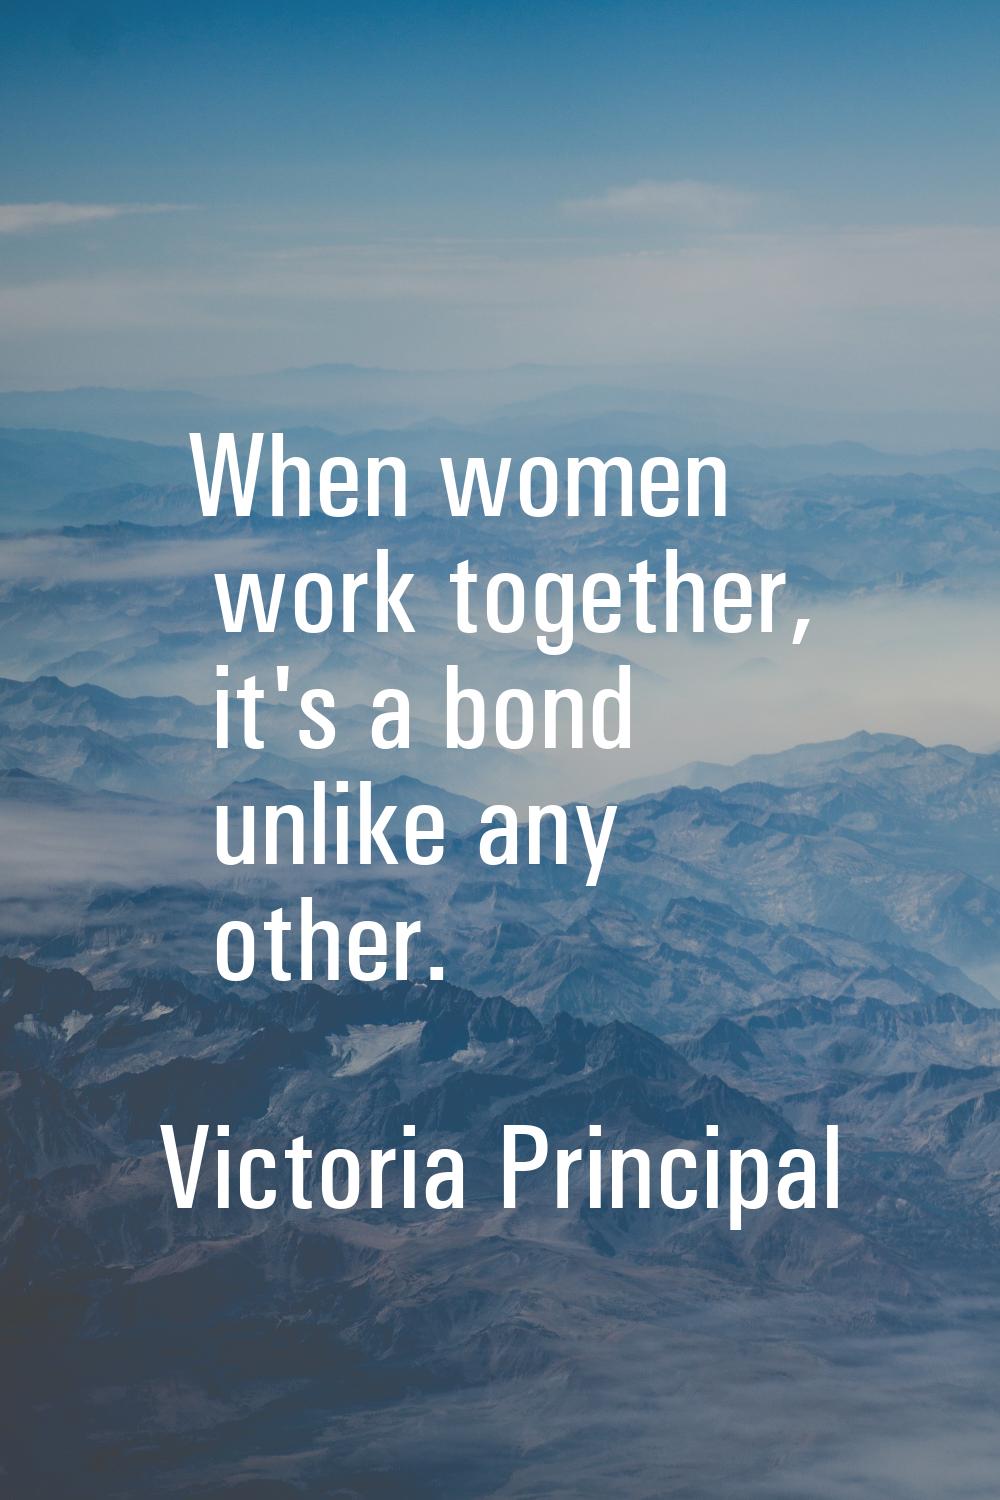 When women work together, it's a bond unlike any other.